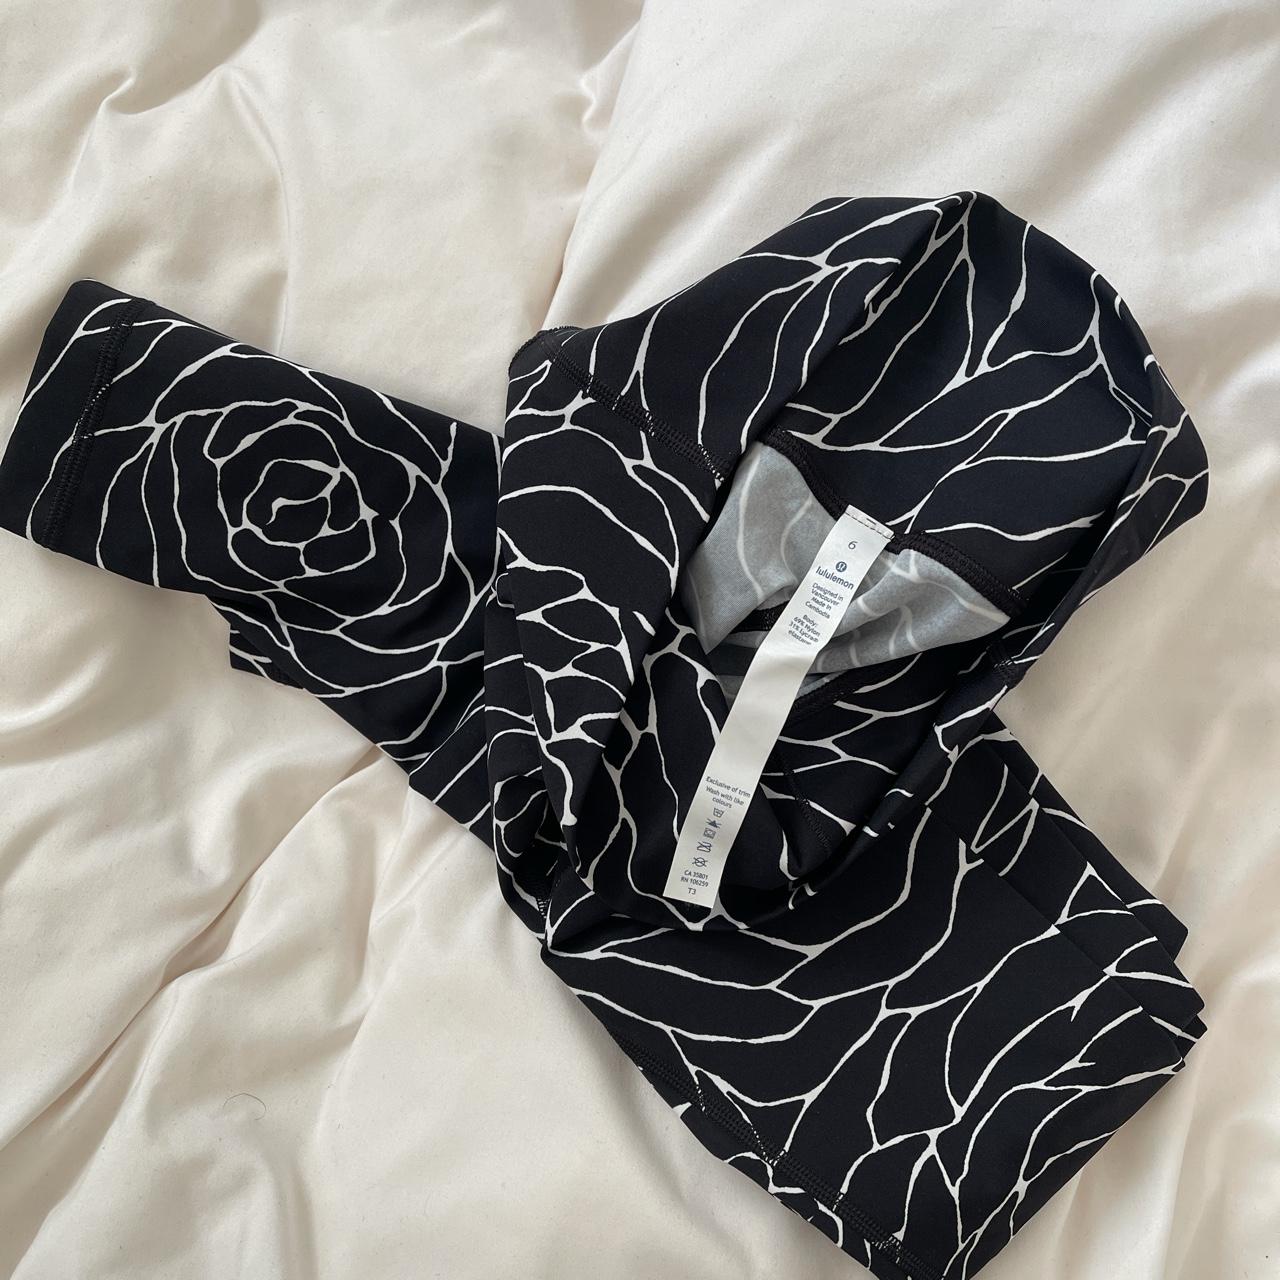 BRAND NEW without tags:, Lululemon Wunder Under